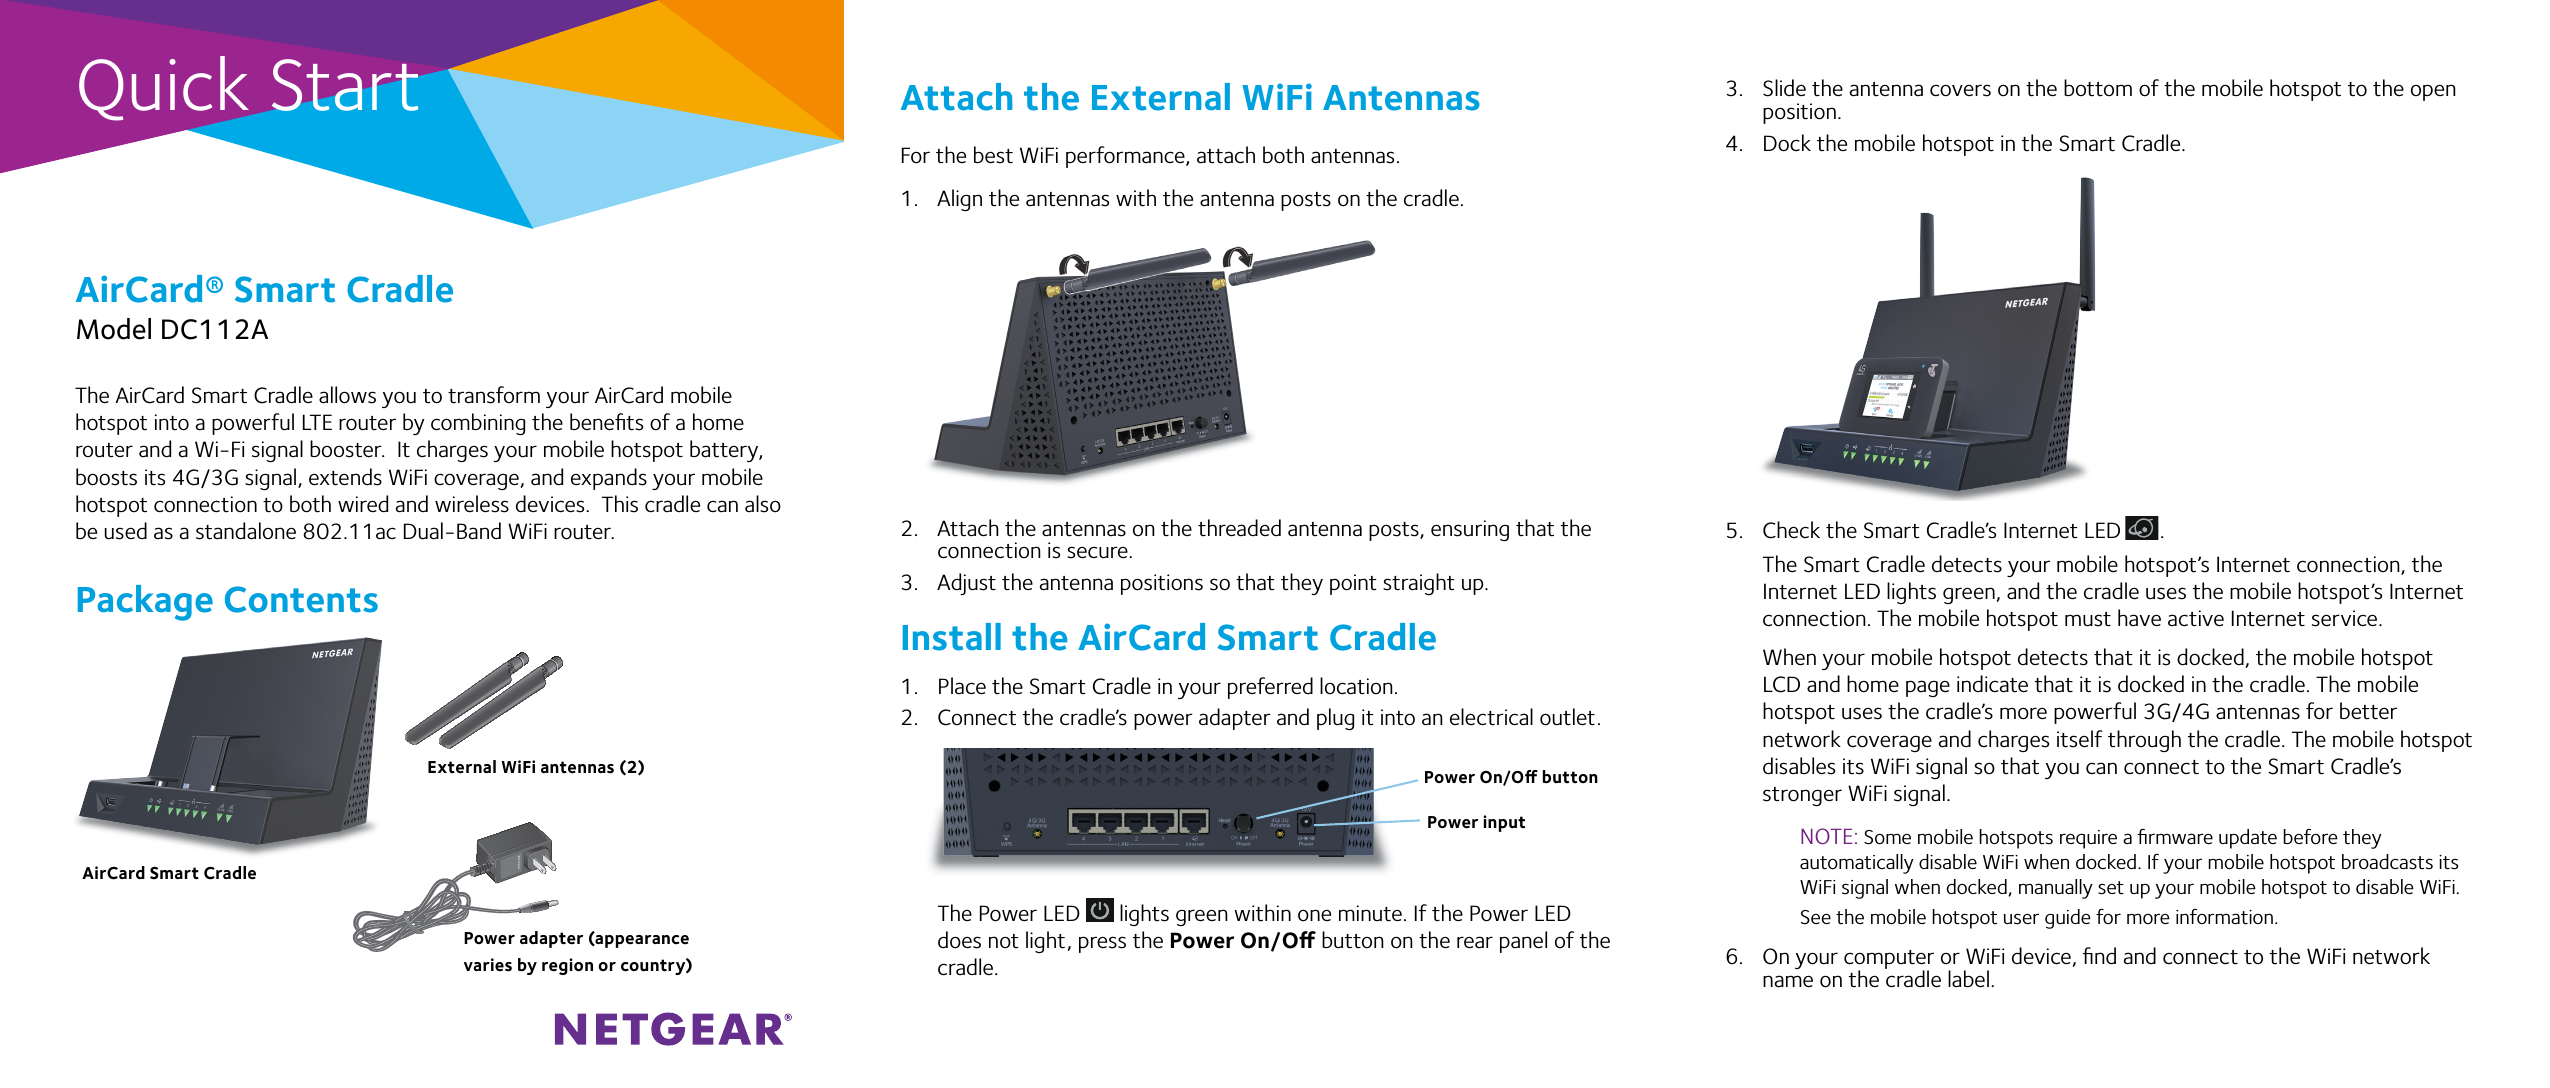 Quick StartAirCard® Smart CradleModel DC112AAttach the External WiFi AntennasFor the best WiFi performance, attach both antennas.1.  Align the antennas with the antenna posts on the cradle.2.  Attach the antennas on the threaded antenna posts, ensuring that the connection is secure.3.  Adjust the antenna positions so that they point straight up.Install the AirCard Smart Cradle1.  Place the Smart Cradle in your preferred location. 2.  Connect the cradle’s power adapter and plug it into an electrical outlet.The Power LED   lights green within one minute. If the Power LED does not light, press the Power On/O button on the rear panel of the cradle.The AirCard Smart Cradle allows you to transform your AirCard mobile hotspot into a powerful LTE router by combining the beneﬁts of a home router and a Wi-Fi signal booster.  It charges your mobile hotspot battery, boosts its 4G/3G signal, extends WiFi coverage, and expands your mobile hotspot connection to both wired and wireless devices.  This cradle can also be used as a standalone 802.11ac Dual-Band WiFi router.Package Contents3.  Slide the antenna covers on the bottom of the mobile hotspot to the open position. 4.  Dock the mobile hotspot in the Smart Cradle.5.  Check the Smart Cradle’s Internet LED       .The Smart Cradle detects your mobile hotspot’s Internet connection, the Internet LED lights green, and the cradle uses the mobile hotspot’s Internet connection. The mobile hotspot must have active Internet service.When your mobile hotspot detects that it is docked, the mobile hotspot LCD and home page indicate that it is docked in the cradle. The mobile hotspot uses the cradle’s more powerful 3G/4G antennas for better network coverage and charges itself through the cradle. The mobile hotspot disables its WiFi signal so that you can connect to the Smart Cradle’s stronger WiFi signal.NOTE: Some mobile hotspots require a ﬁrmware update before they automatically disable WiFi when docked. If your mobile hotspot broadcasts its WiFi signal when docked, manually set up your mobile hotspot to disable WiFi.  See the mobile hotspot user guide for more information.6.  On your computer or WiFi device, ﬁnd and connect to the WiFi network name on the cradle label.Power adapter (appearance varies by region or country)External WiFi antennas (2)AirCard Smart CradlePower On/O buttonPower input